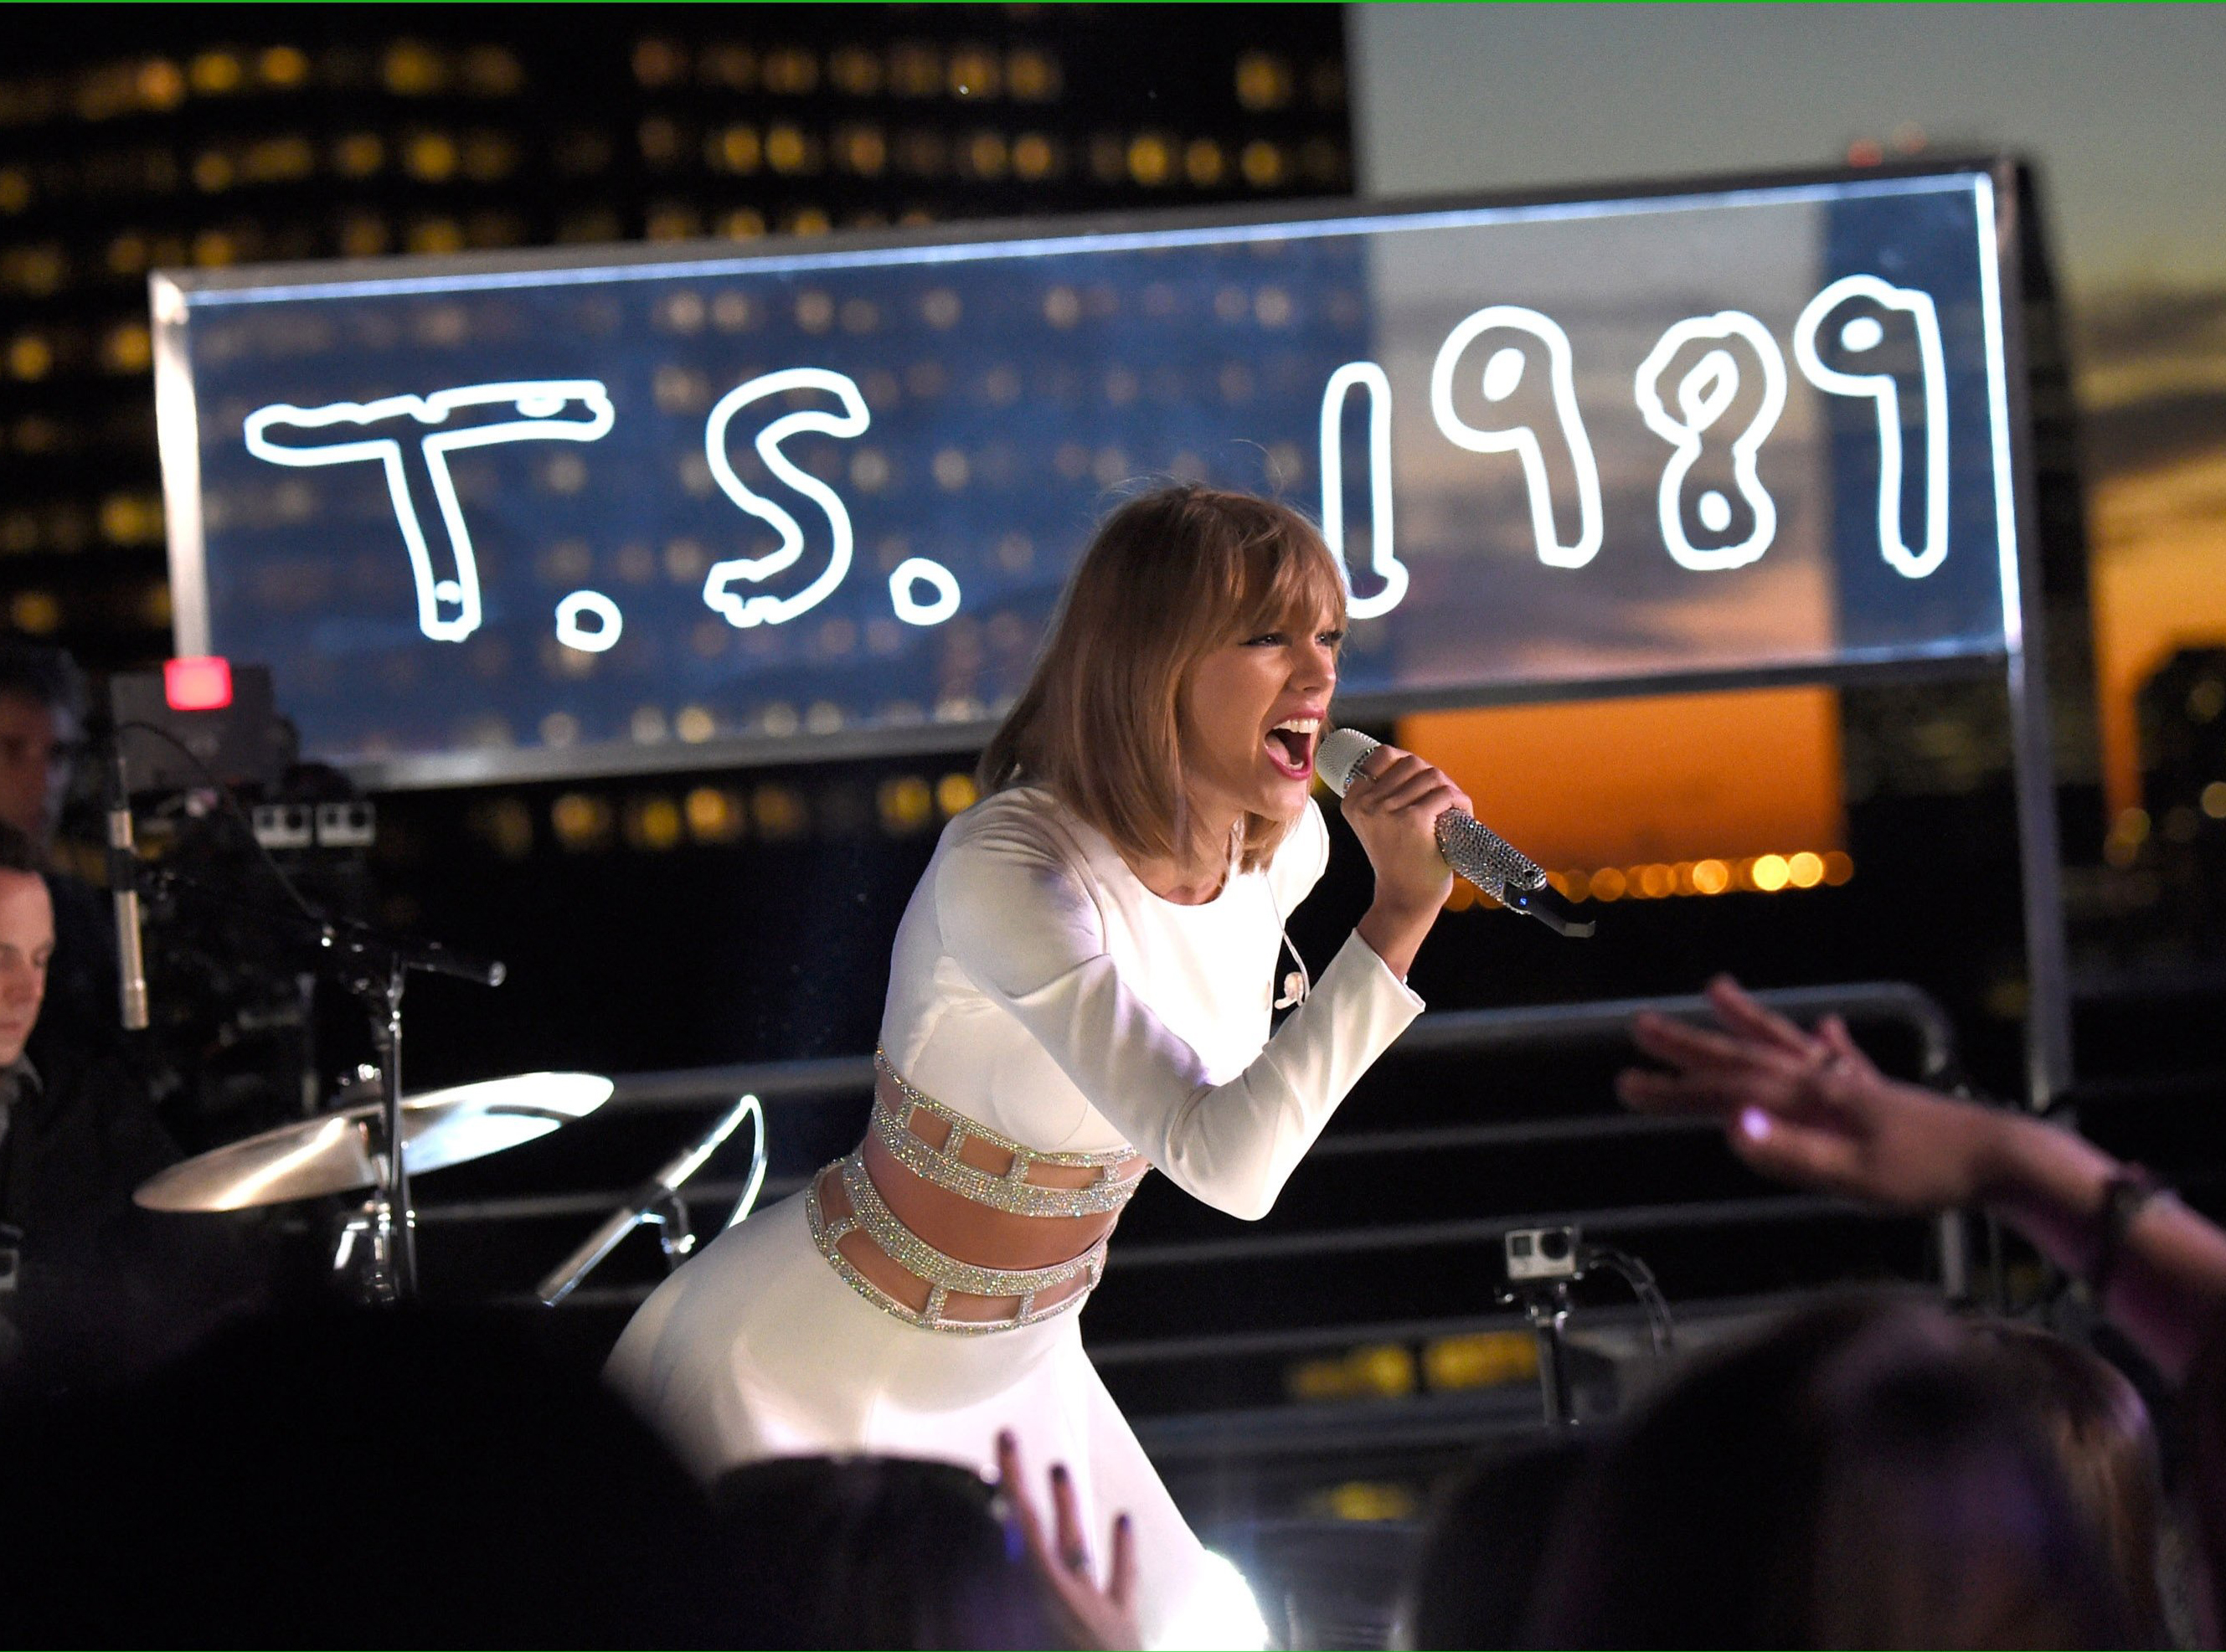 Taylor Swift 1989 Expected To Hit 1 Million Sales In Debut Week Time